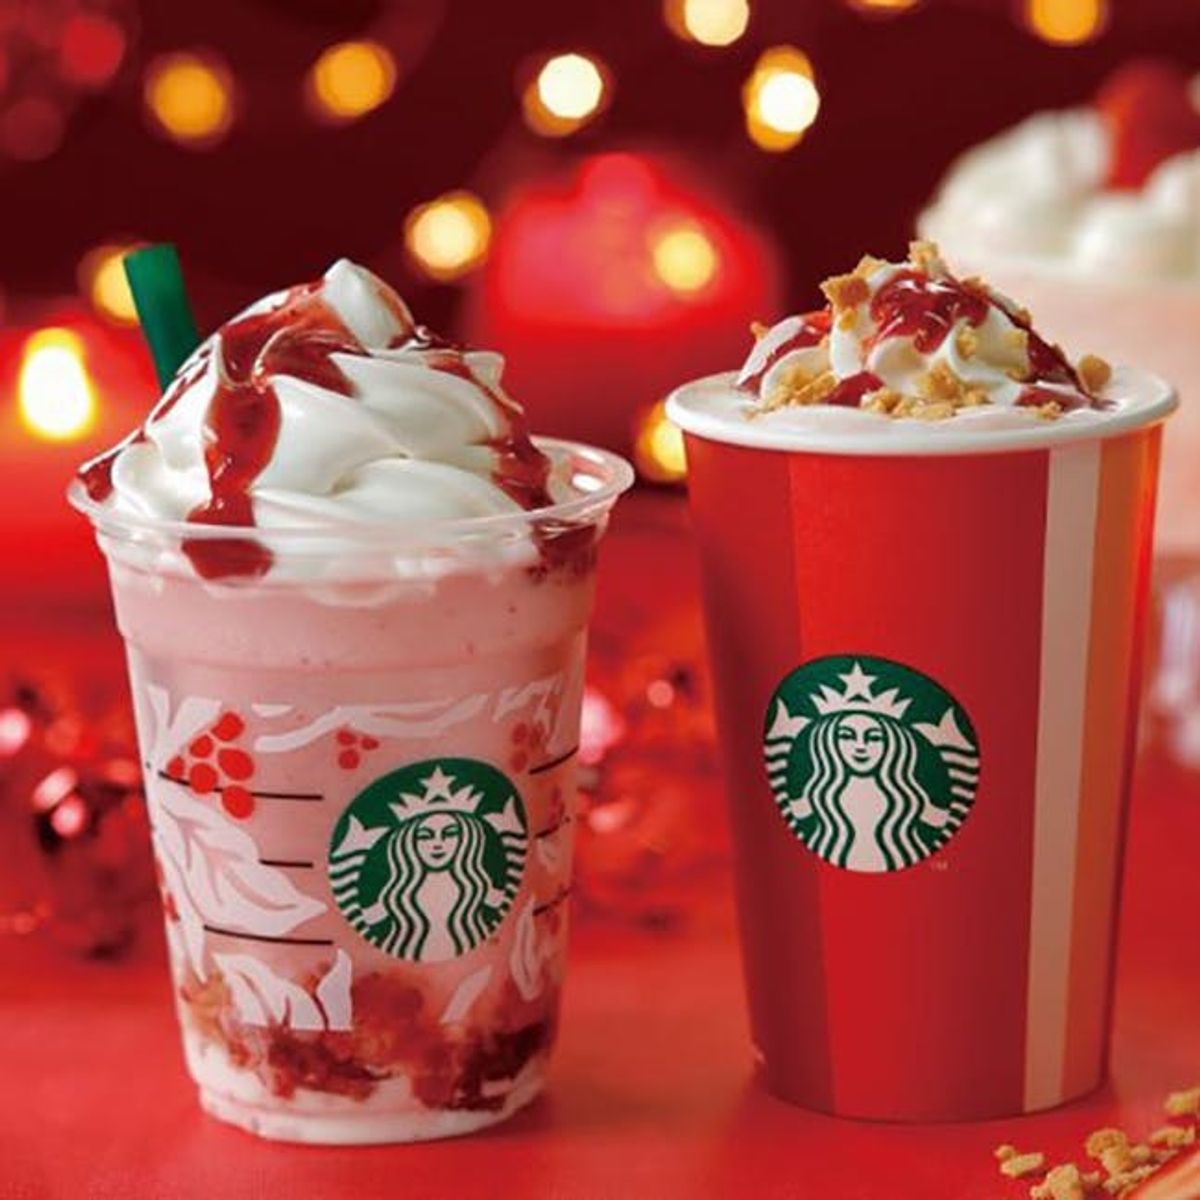 18 Starbucks Holiday Drinks From Around the World We’re Craving